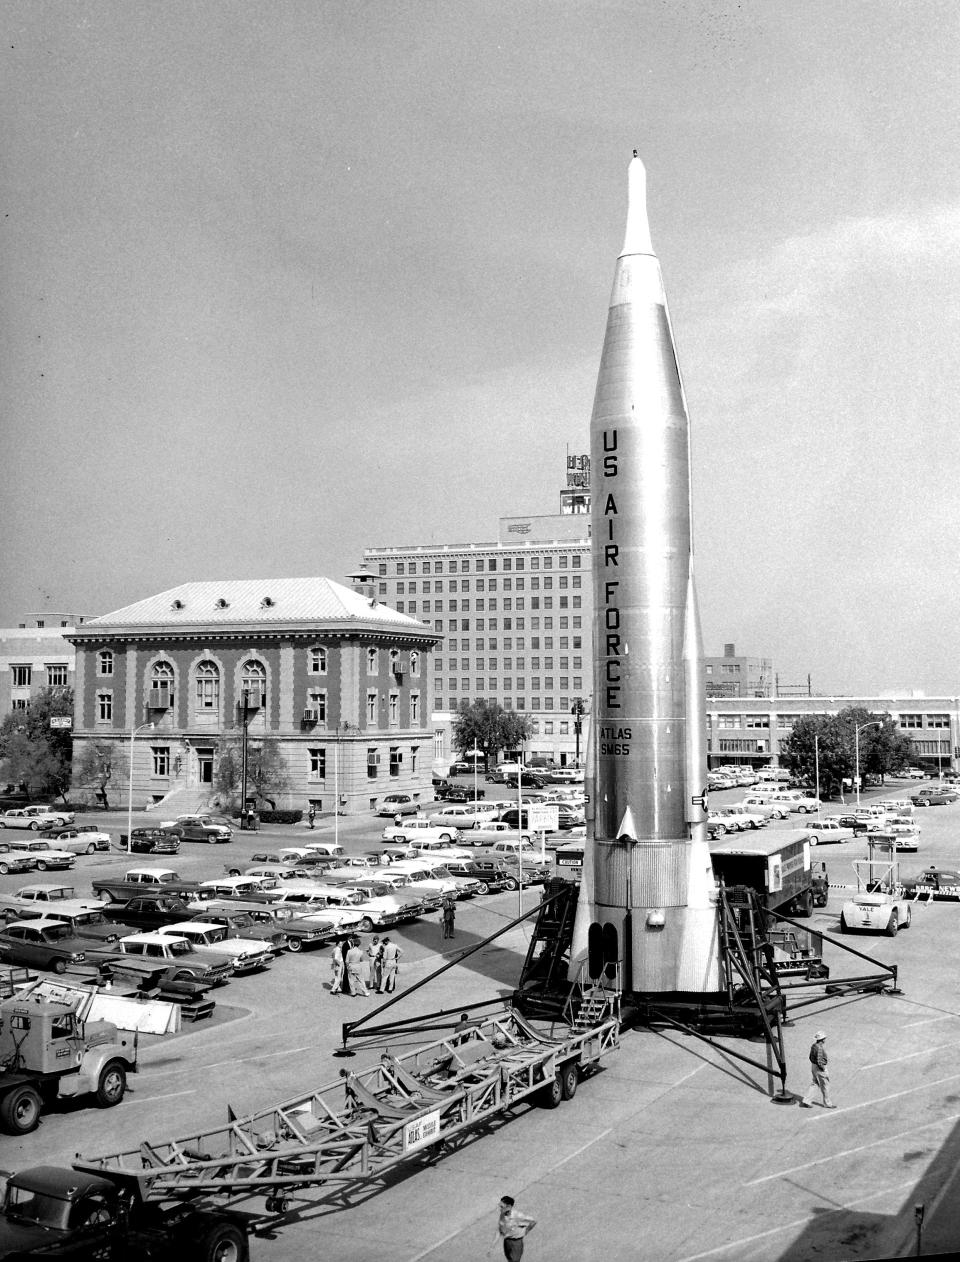 A mock-up of an Atlas missile is displayed in the 200 block of Walnut Street in Abilene Oct. 2, 1960. The unit remained "open for inspection" for the curious to investigate. Abilene was surrounded by a ring of 12 Atlas Intercontinental Ballistic Missile silos in the early 1960s.